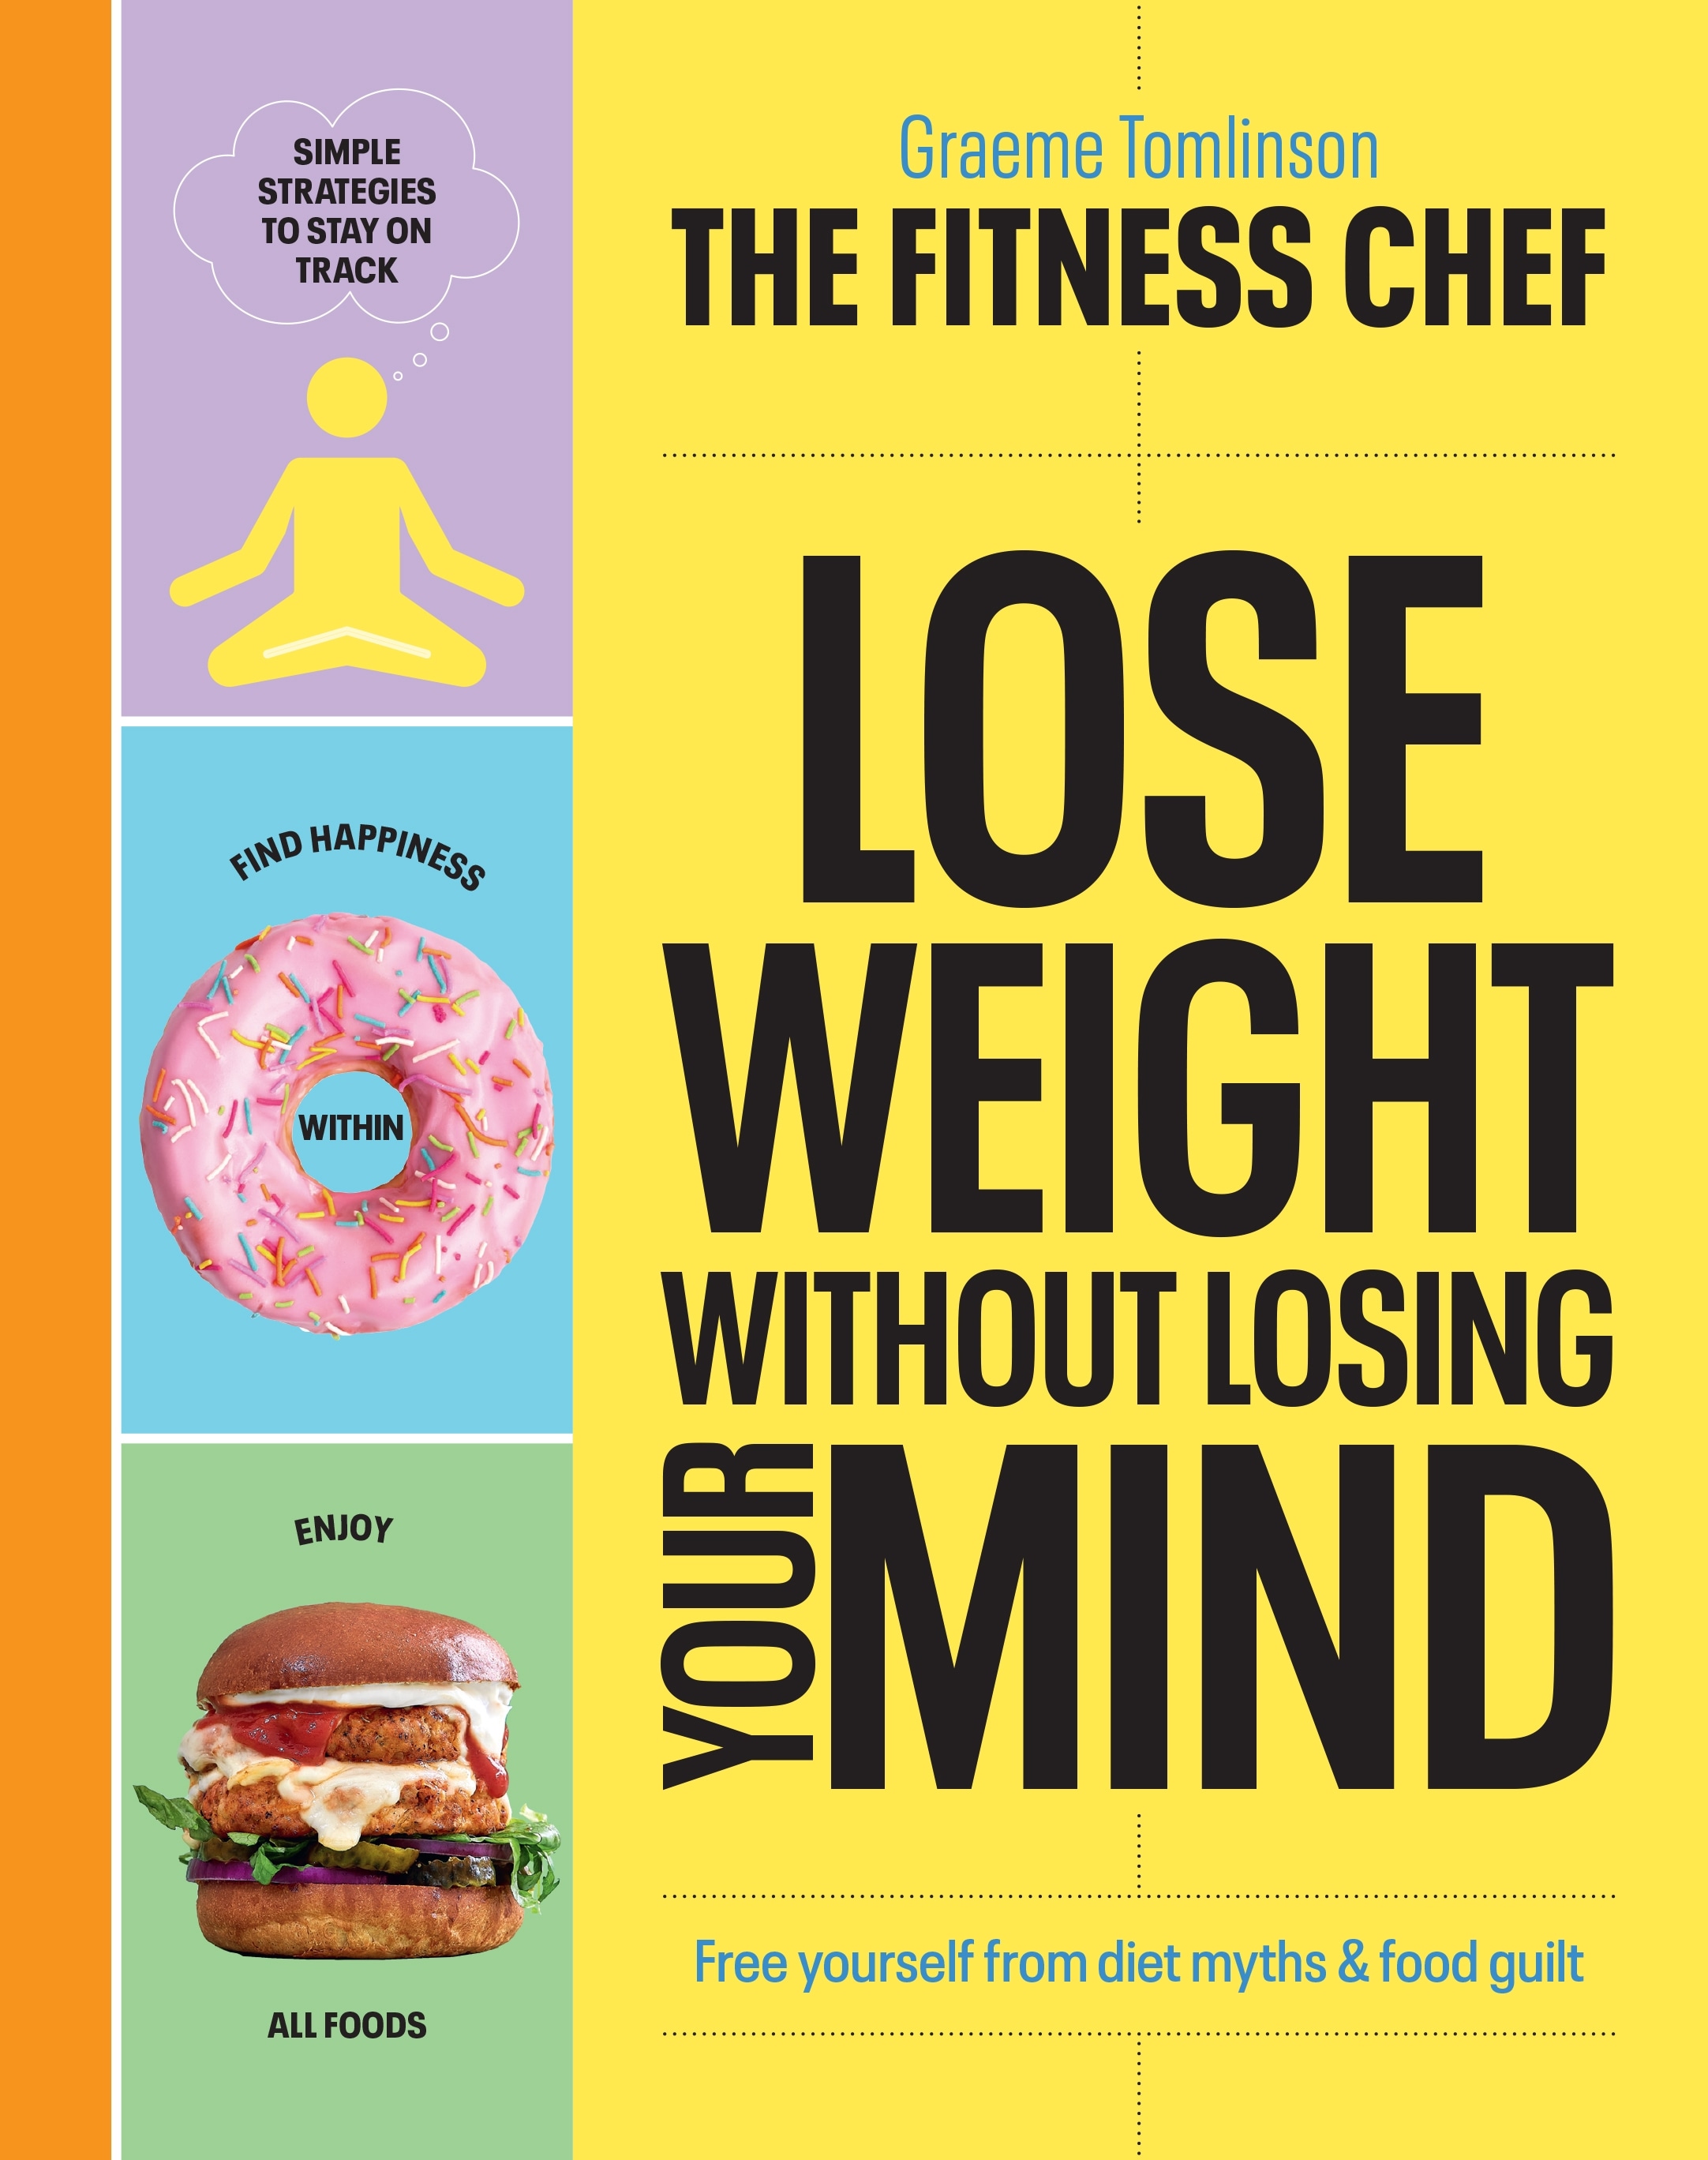 Book “THE FITNESS CHEF – Lose Weight Without Losing Your Mind” by Graeme Tomlinson — January 20, 2022